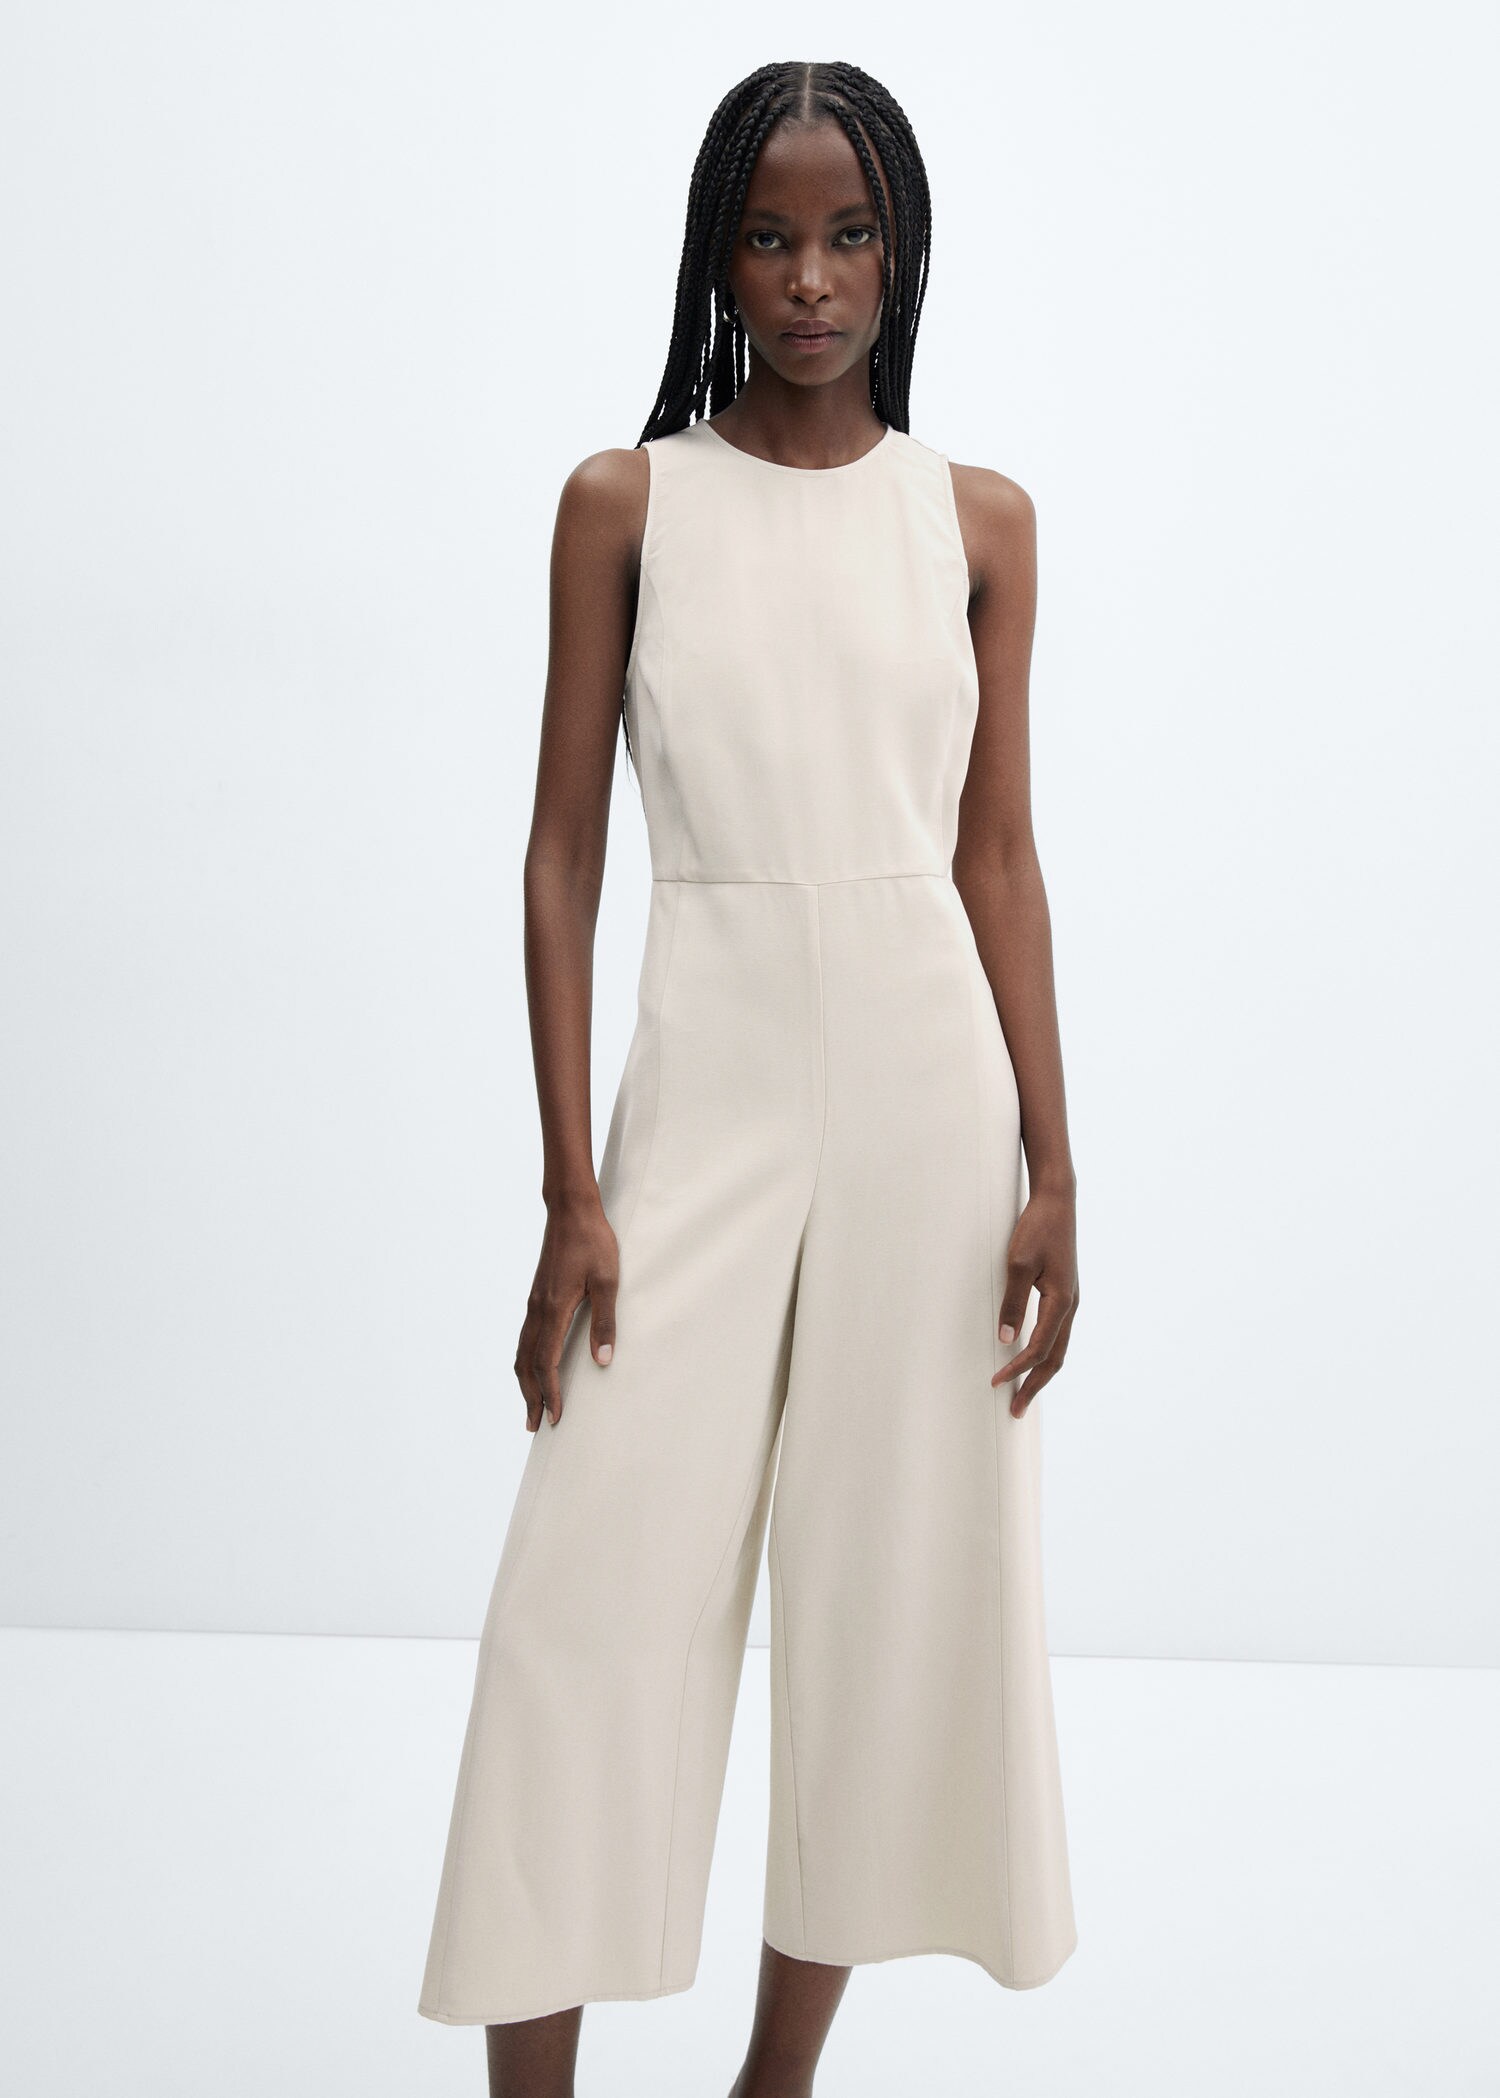 Cropped jumpsuit with straps